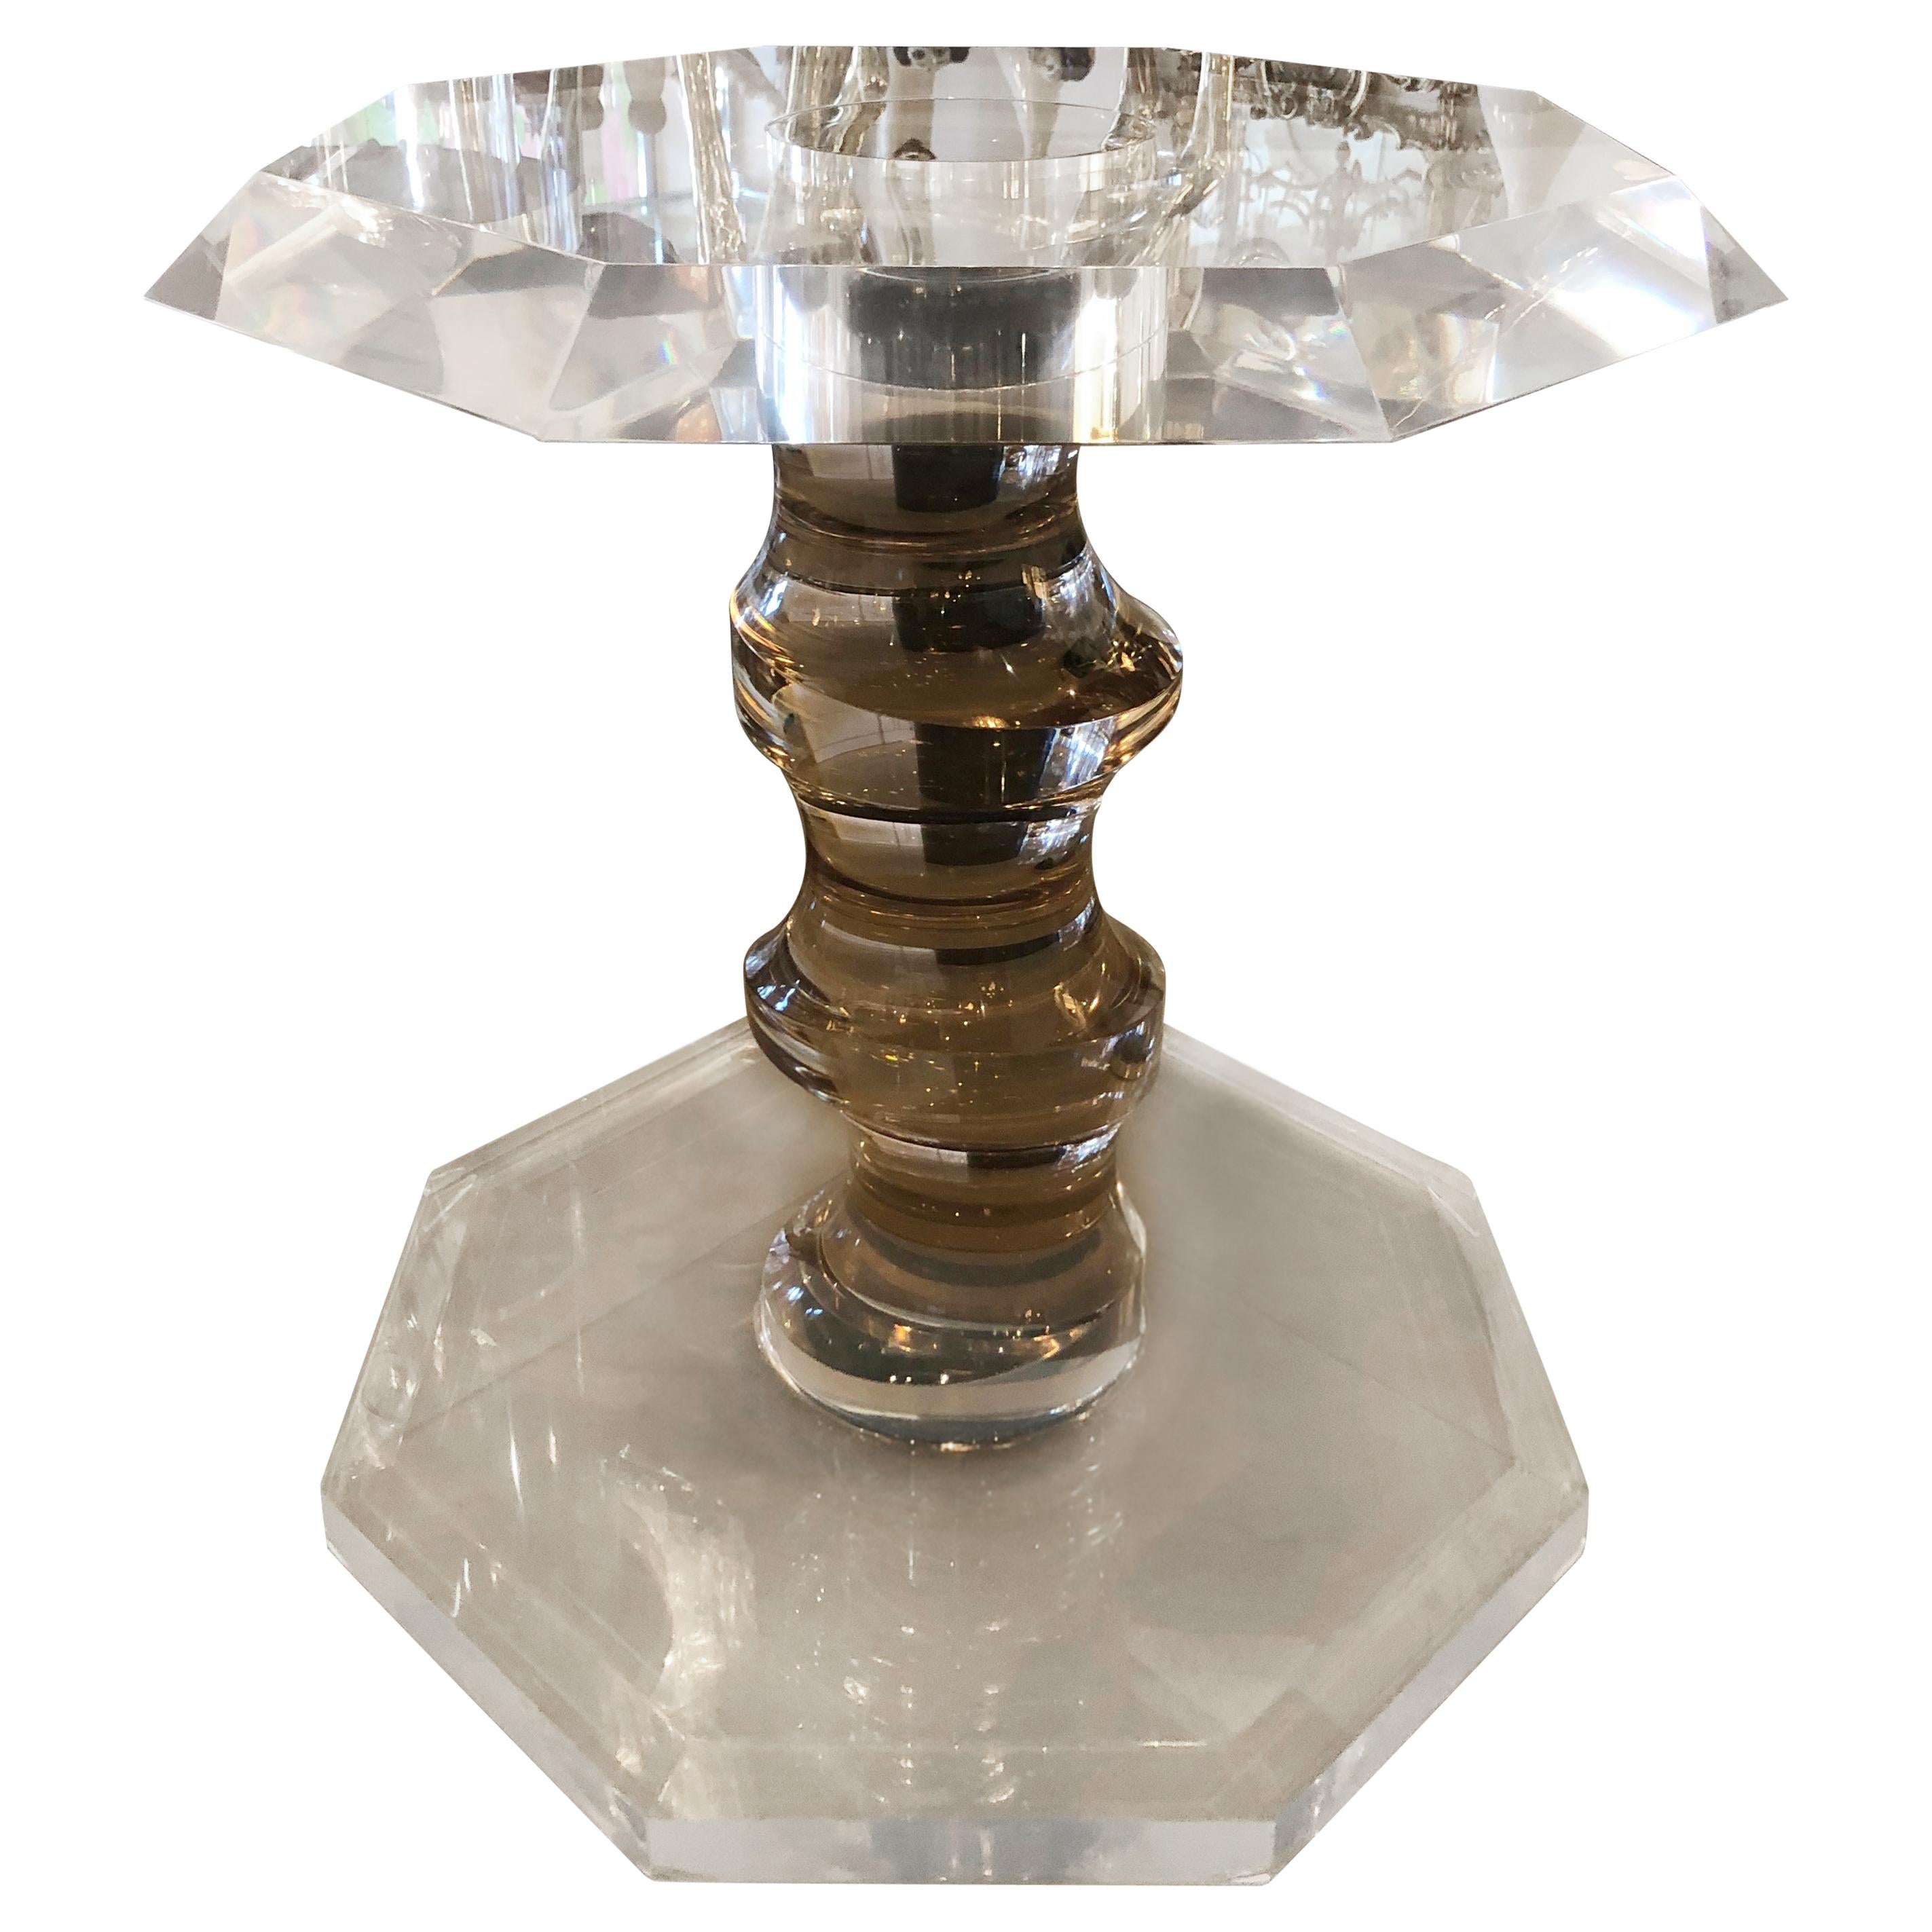 Vintage Swirled Lucite Dining Center Game Table Base